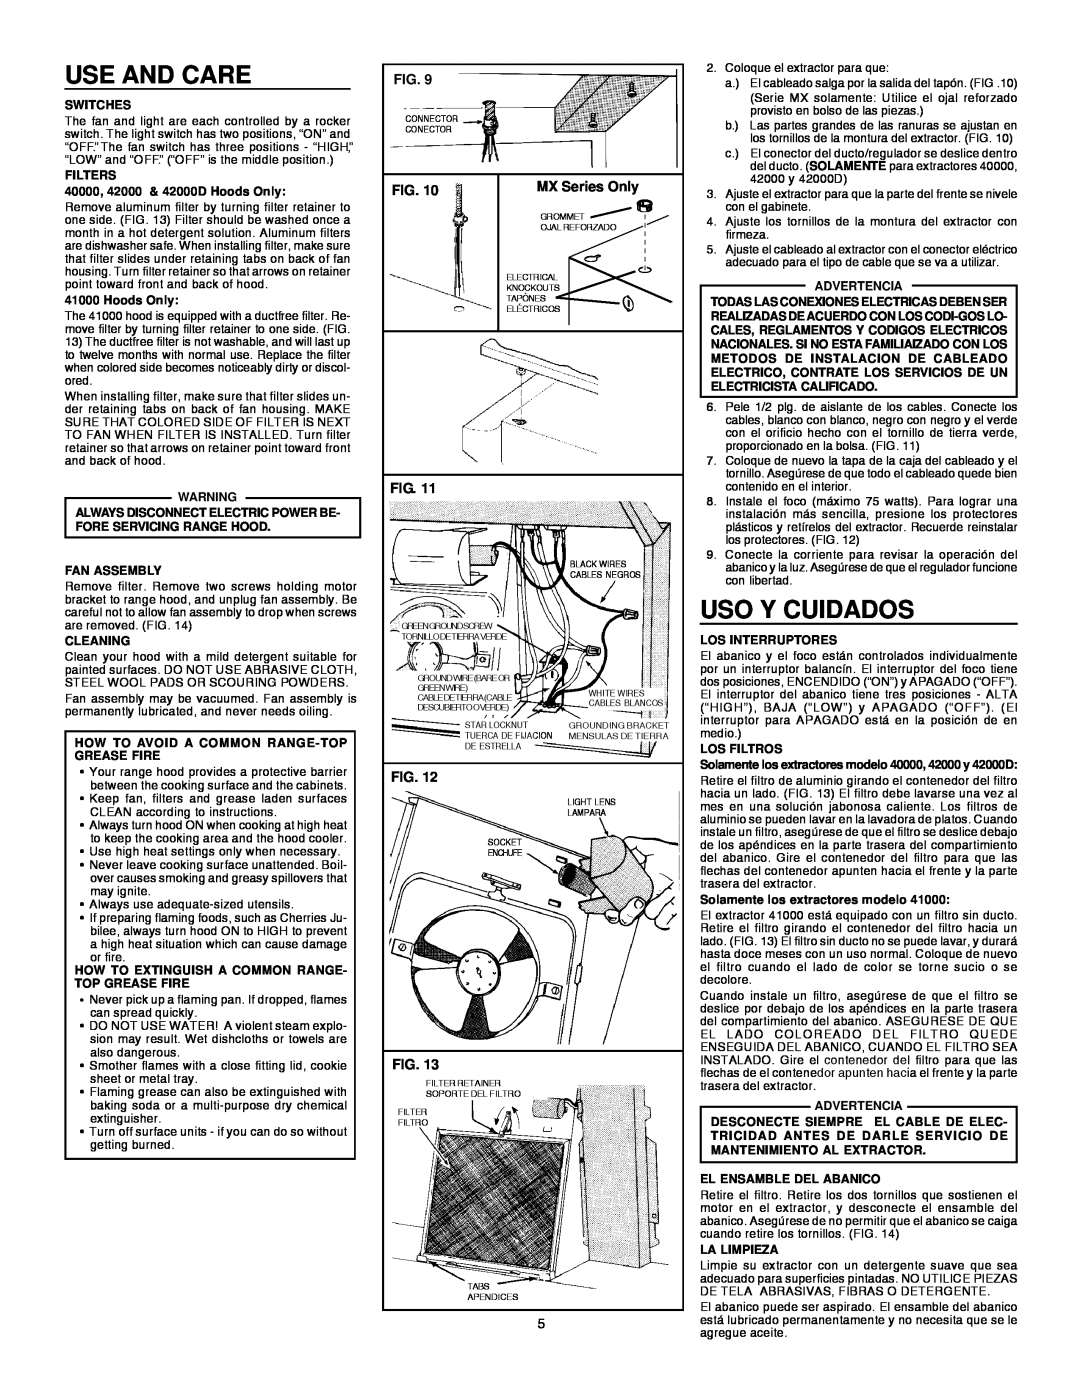 Broan 413023 installation instructions Use And Care, Uso Y Cuidados, MX Series Only 